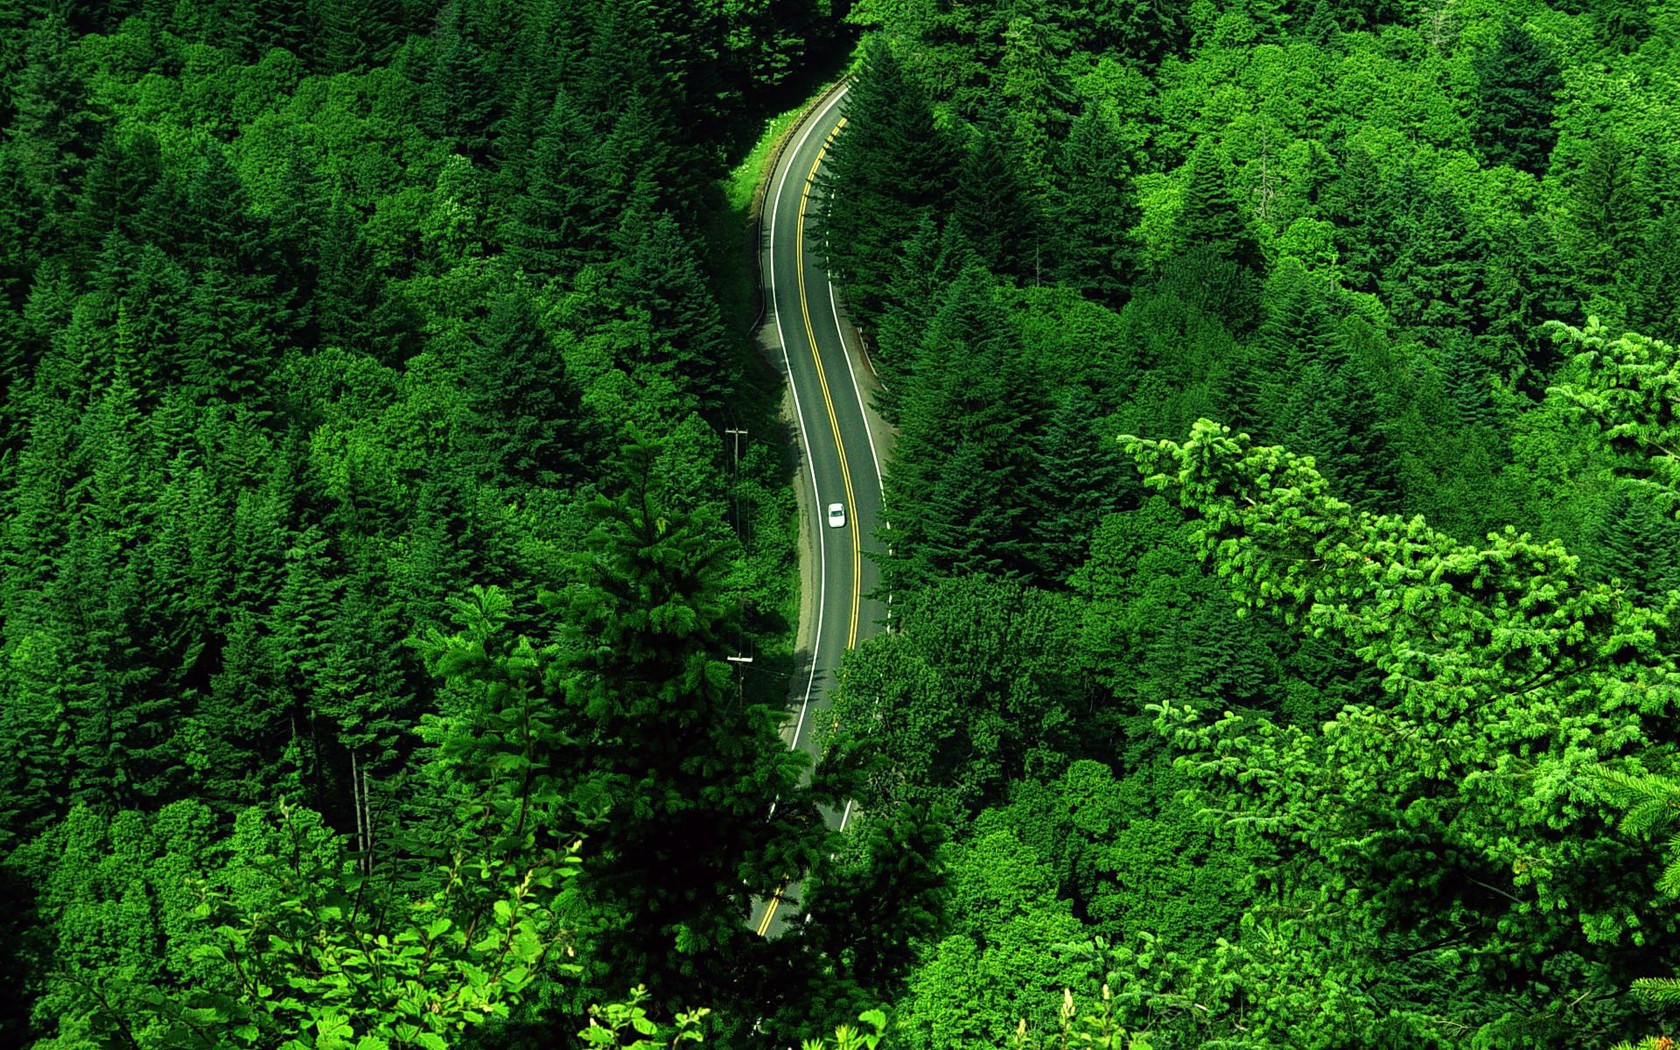 General 1680x1050 road nature landscape water forest aerial view trees car